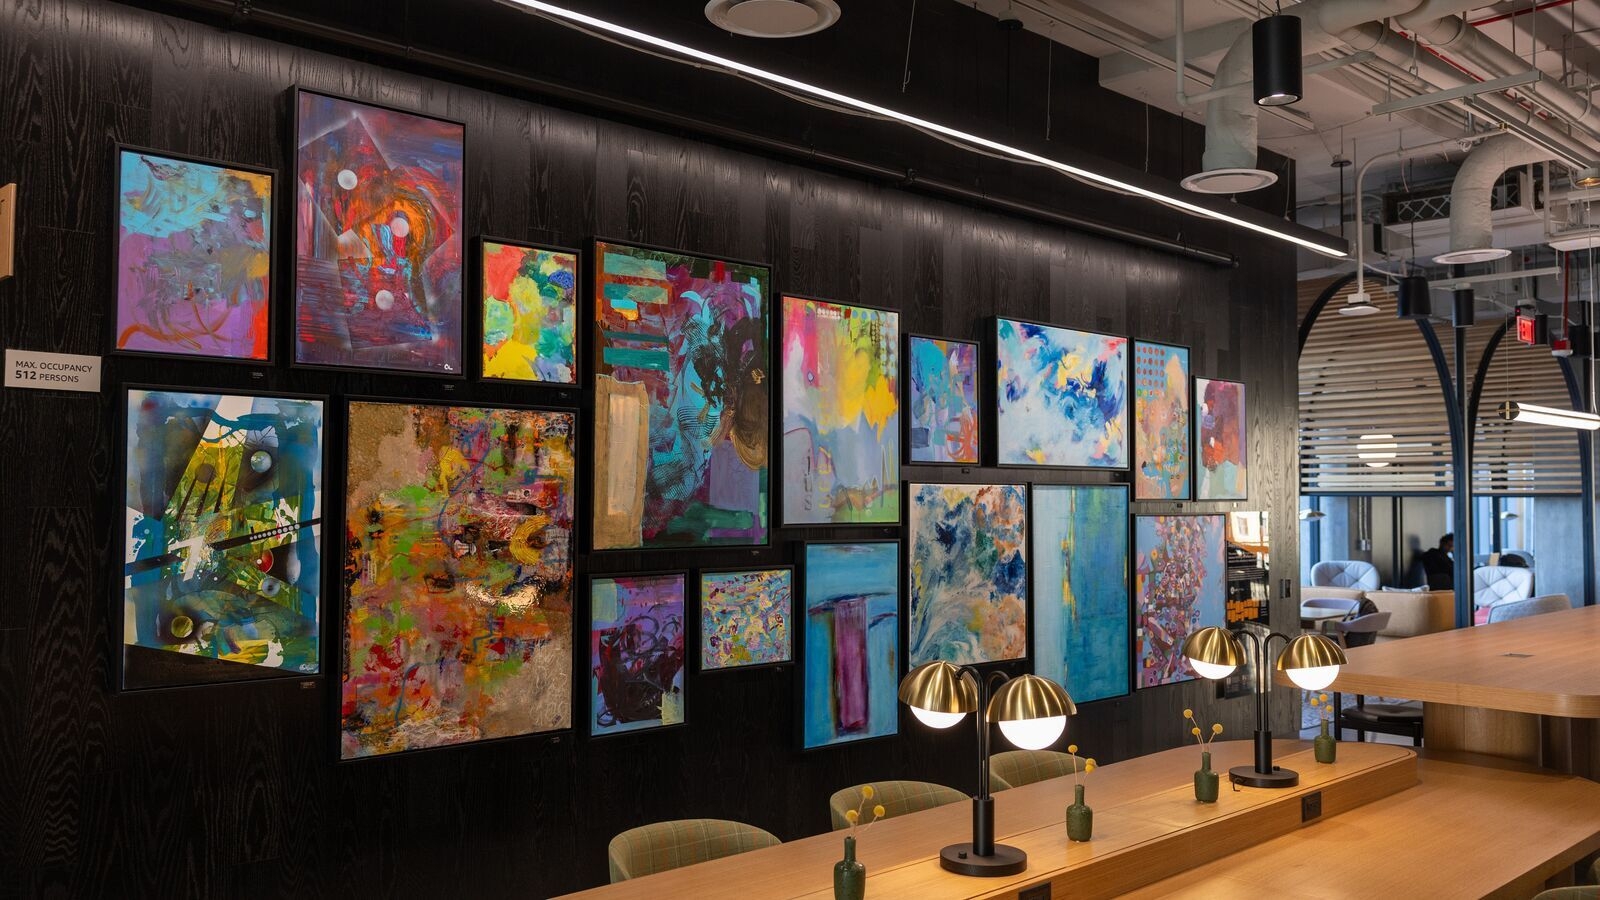 An image of an art installation at Amazon's second headquarters in Arlington, Virginia.